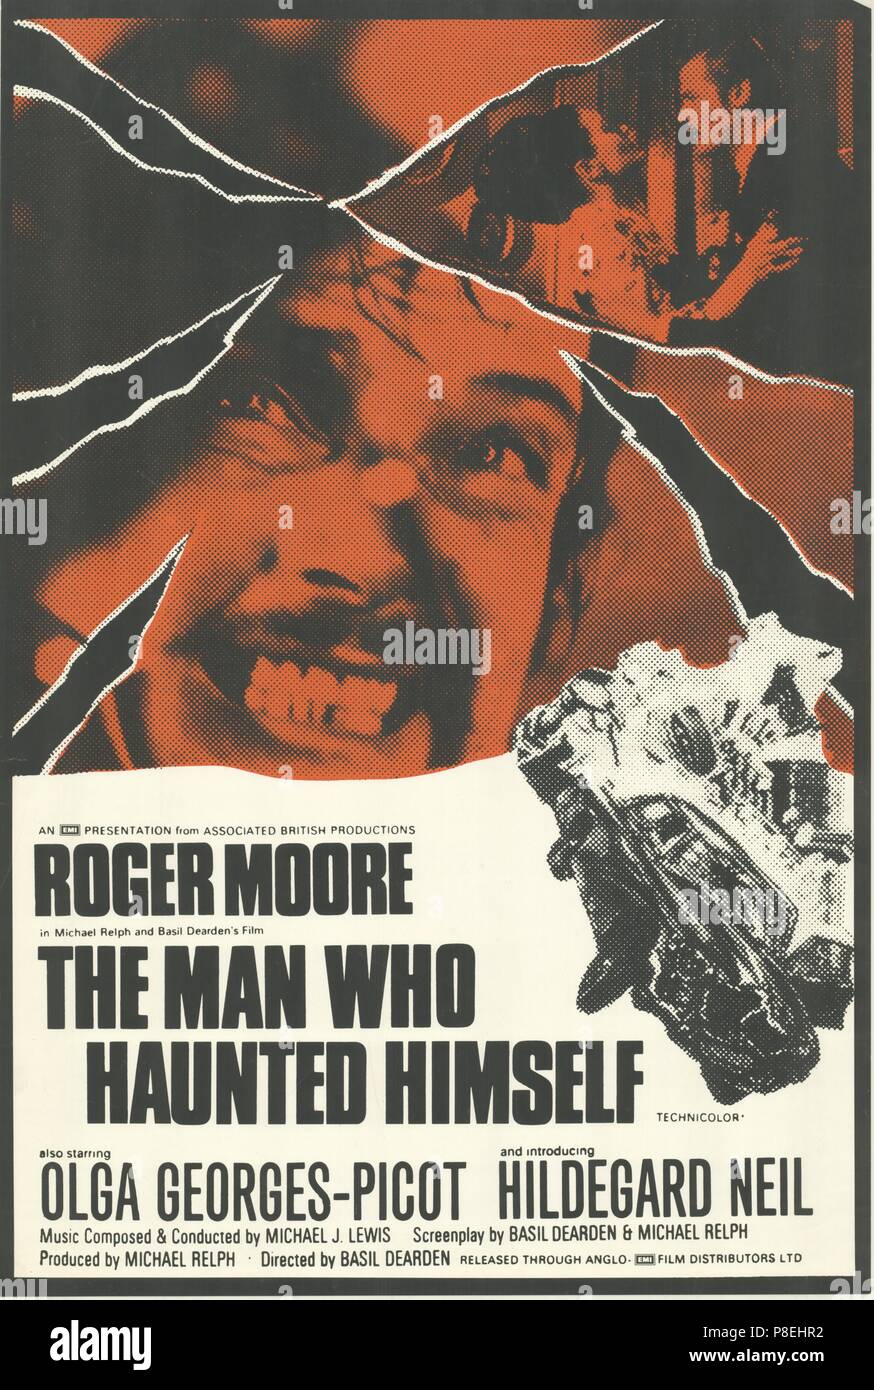 The Man who Haunted Himself (1970) Publicity information, Film Poster,     Date: 1970 Stock Photo